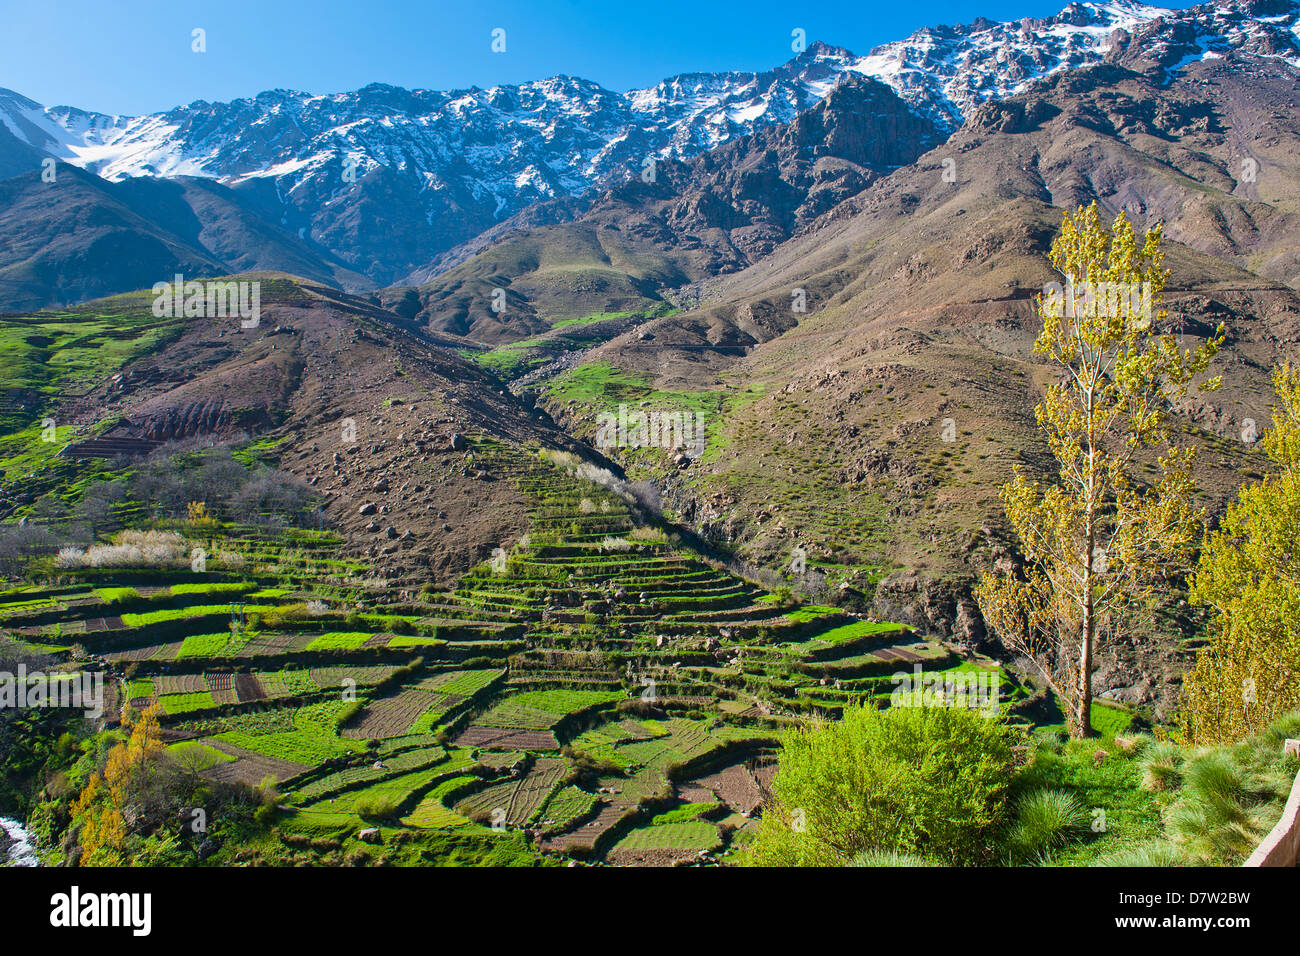 Terraced vegetable fields and farm land belonging to Berber farmers in the High Atlas Mountains, Morocco, North Africa Stock Photo